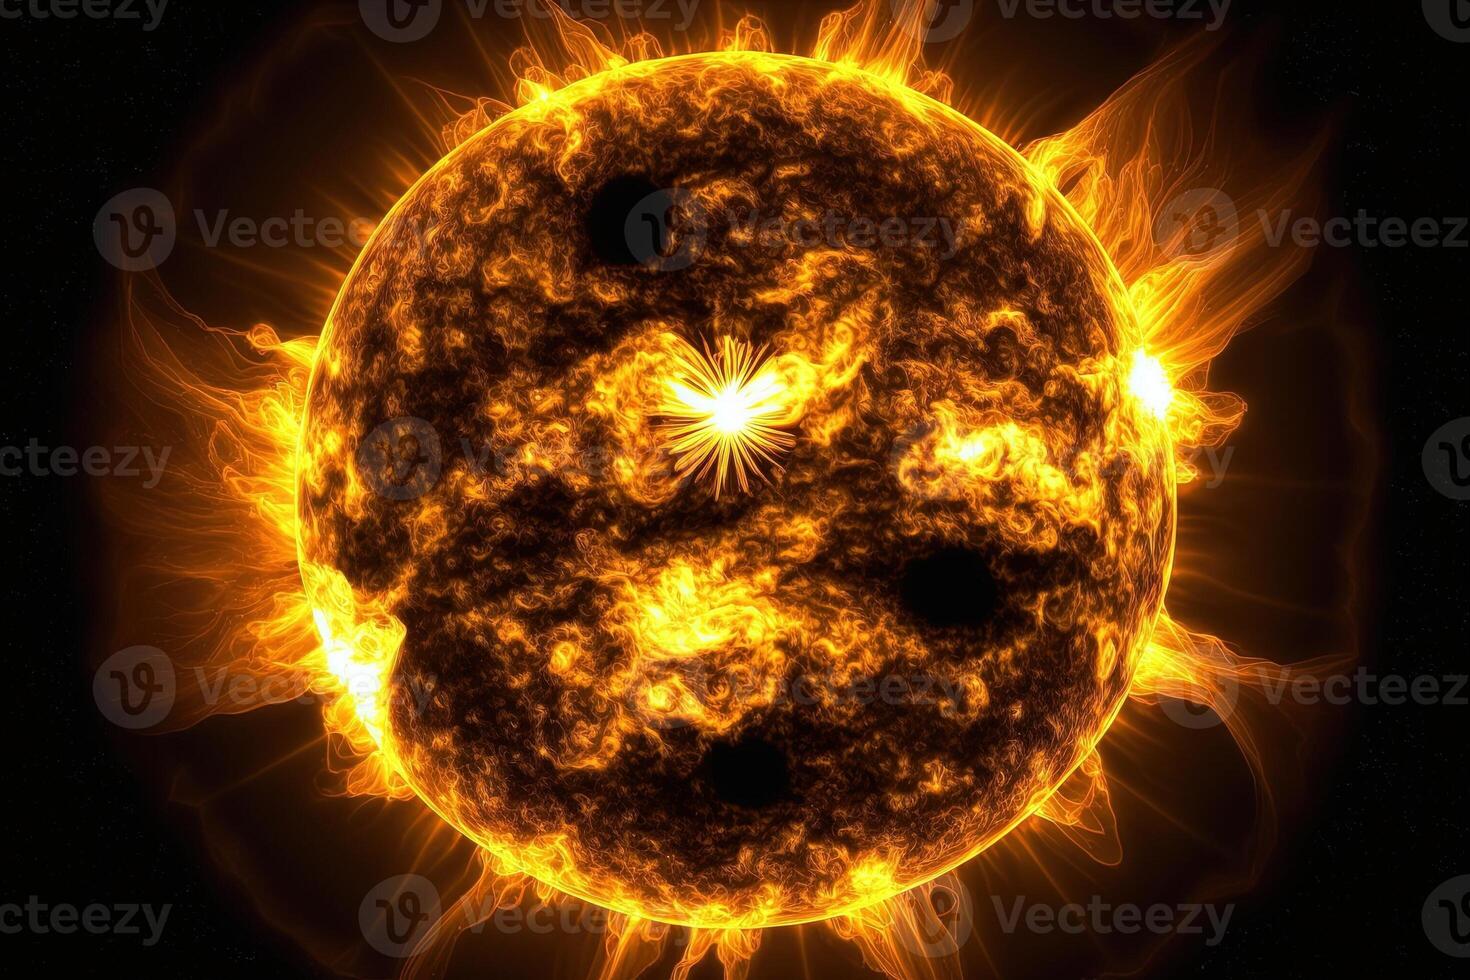 ultra close up detail image of the sun illustration photo